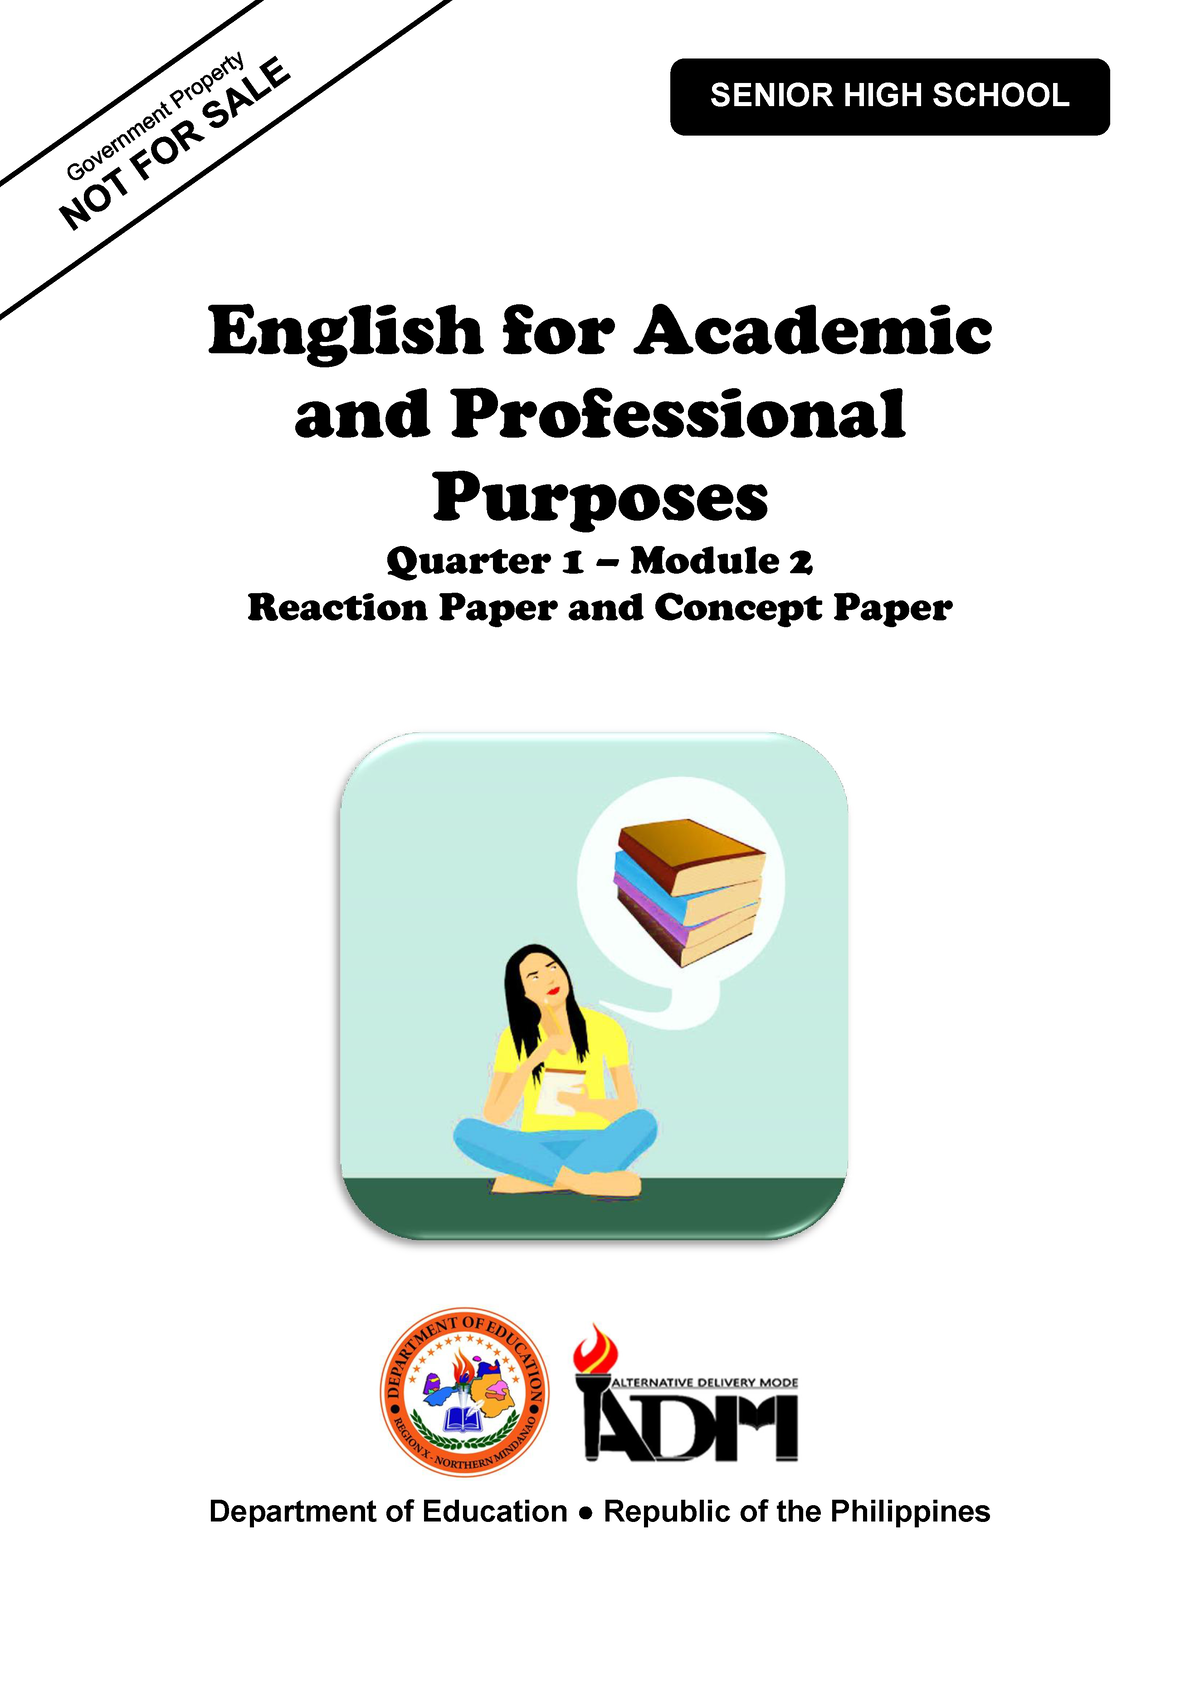 Eapp11 Q1 Mod2 Reaction Paper And Concept Paper Version 3 English For Academic And 4635